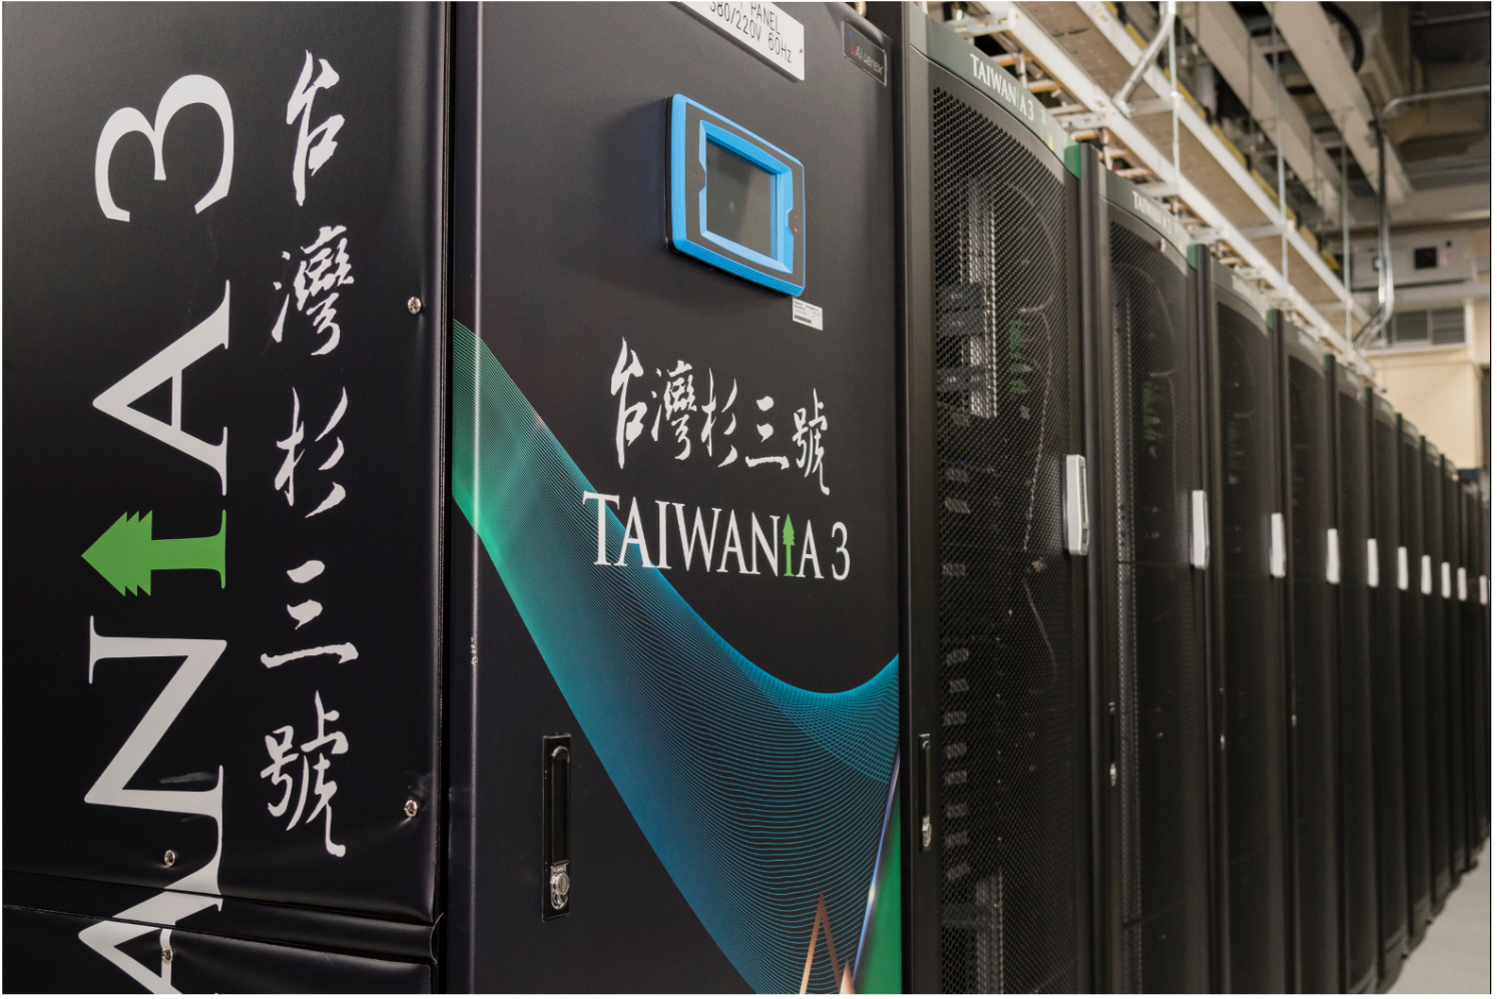 Taiwania 3, located in the Taichung branch of National Center for High-performance Computing, is the latest high-speed computing host that develops a new generation of Peta-level computing energy. With 900 computing nodes and 54,000 computing cores, it can provide computing services in multiple fields.